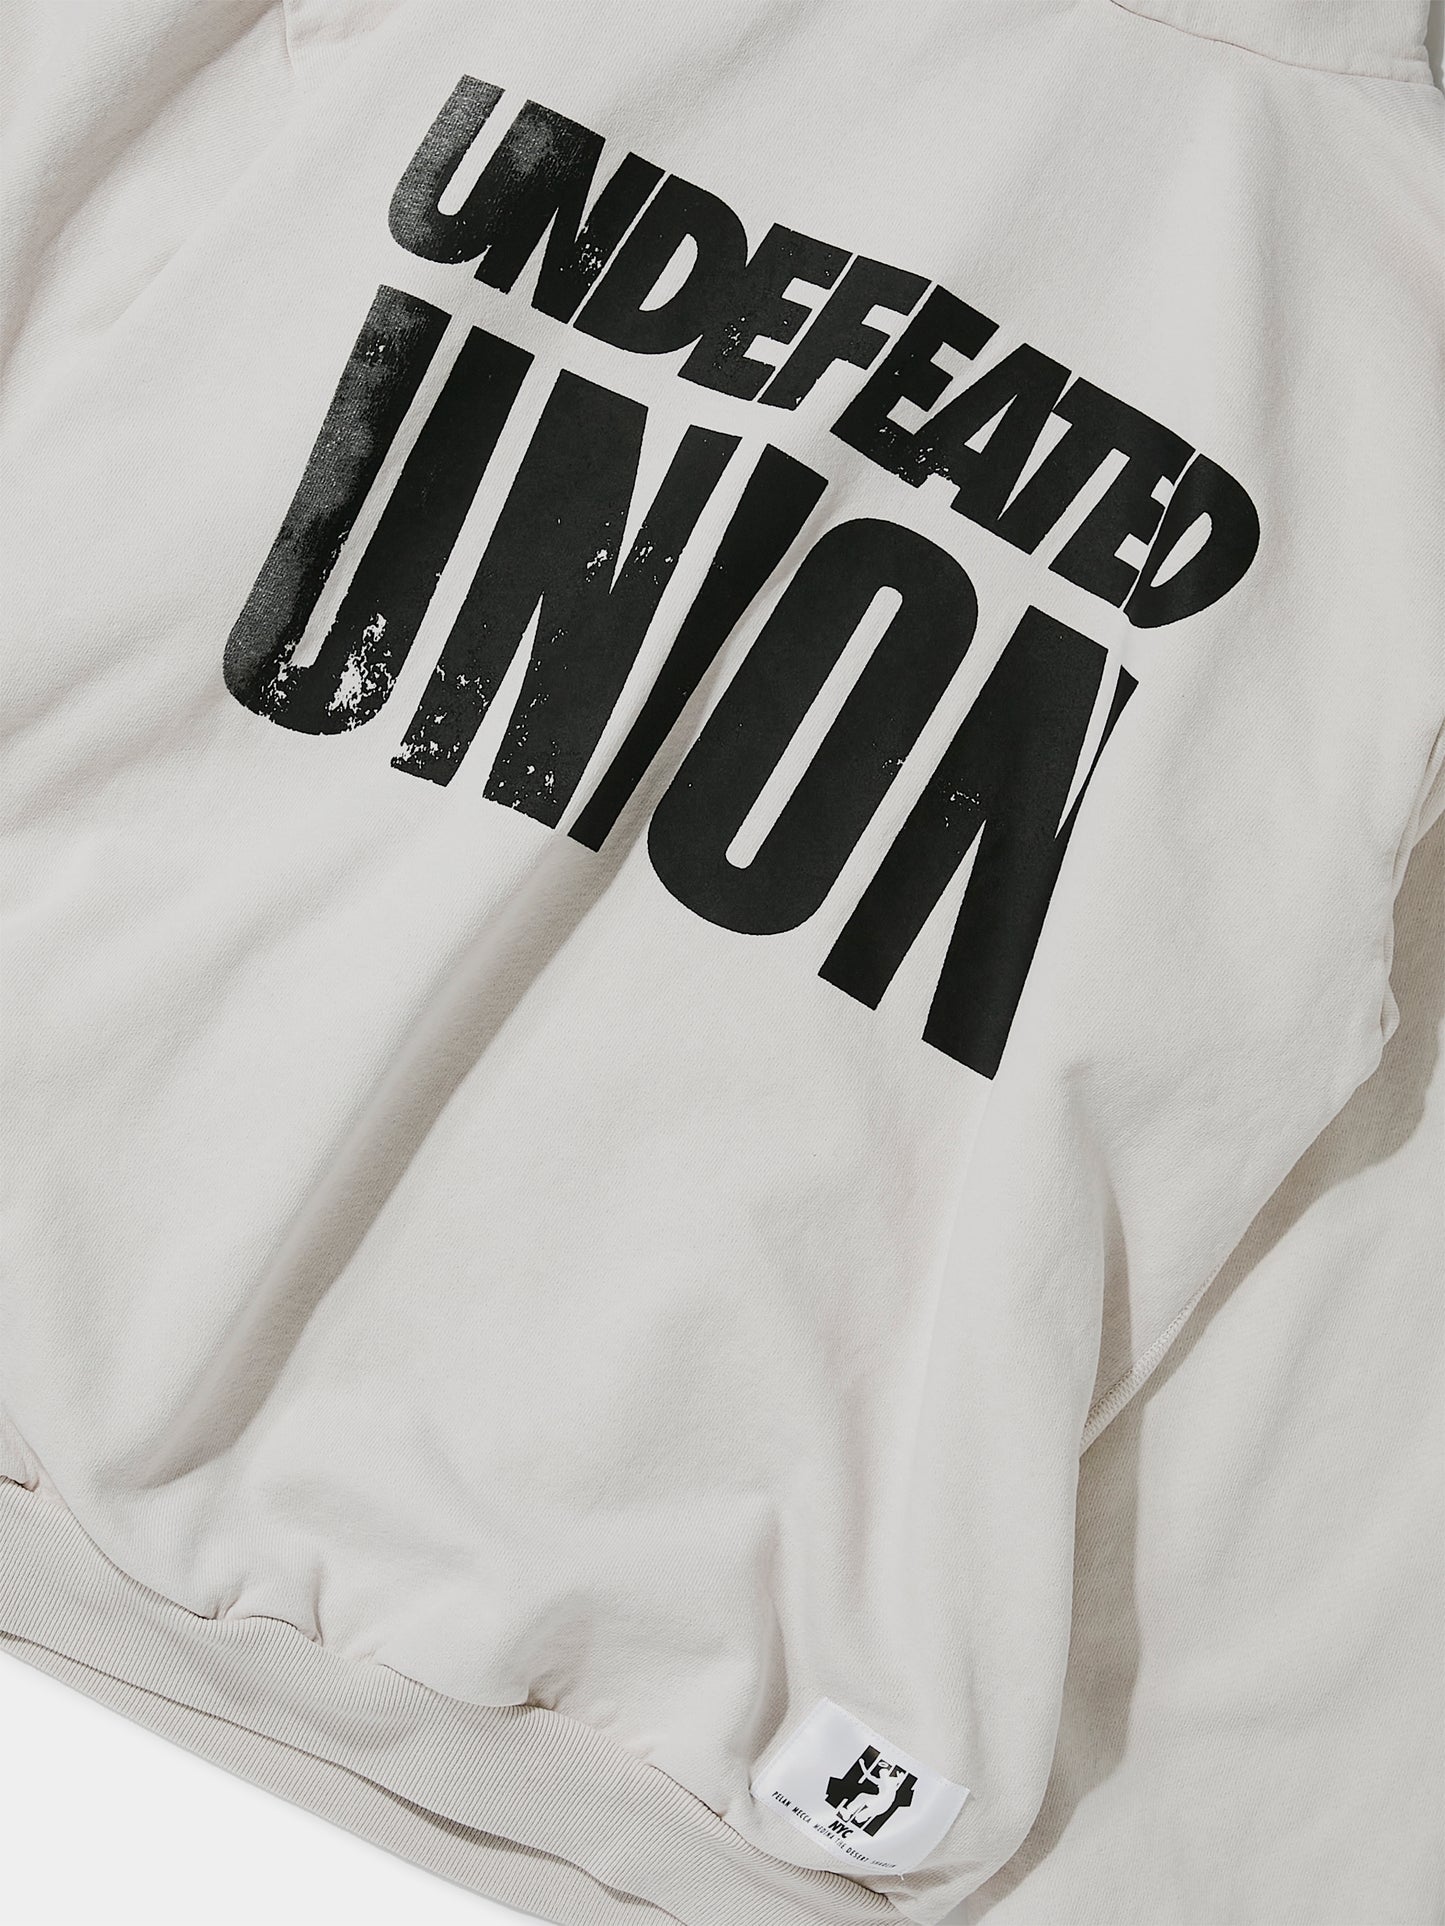 UNDEFEATED x UNION Hoodie (Faded Lt. Grey)